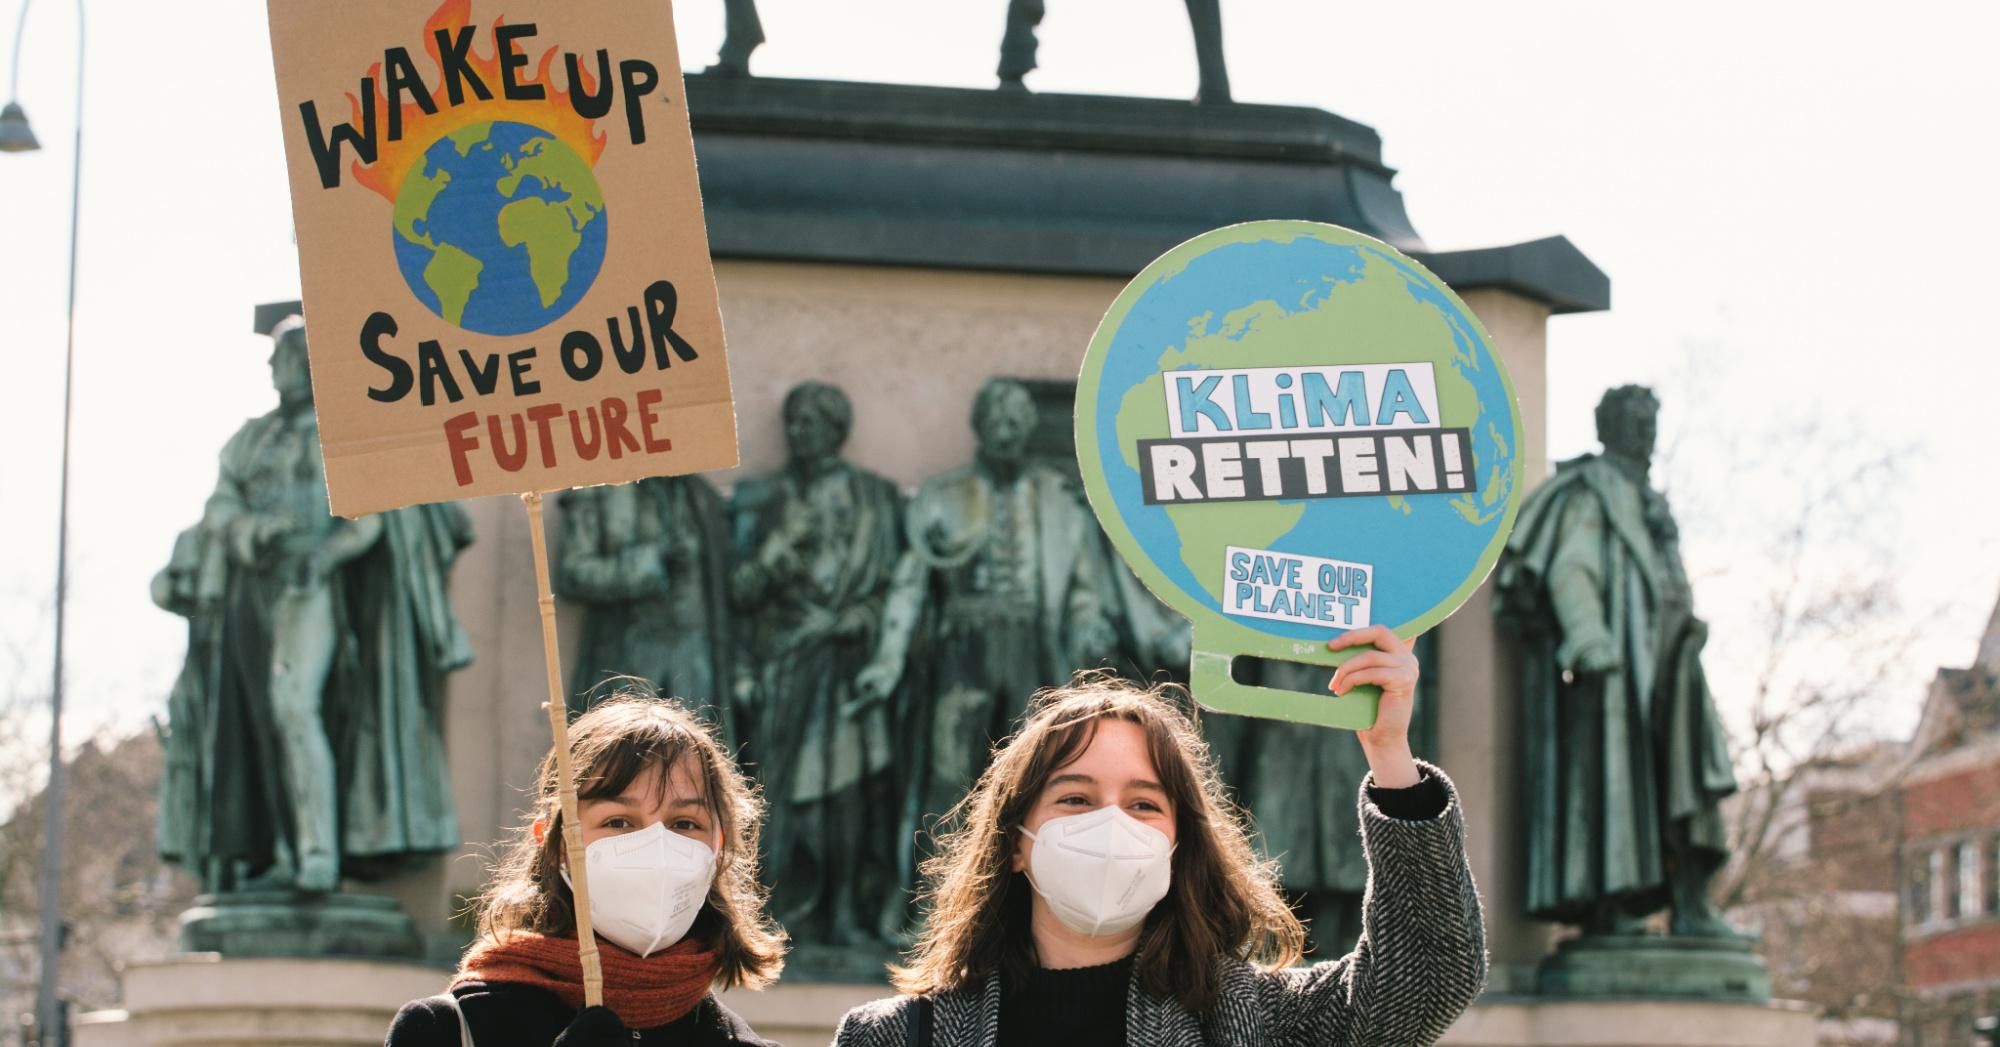 Activists participate in a global climate demonstration organized by the Fridays for Future movement in Cologne, Germany on March 19, 2021, (Photo: Ying Tang/NurPhoto via Getty Images)